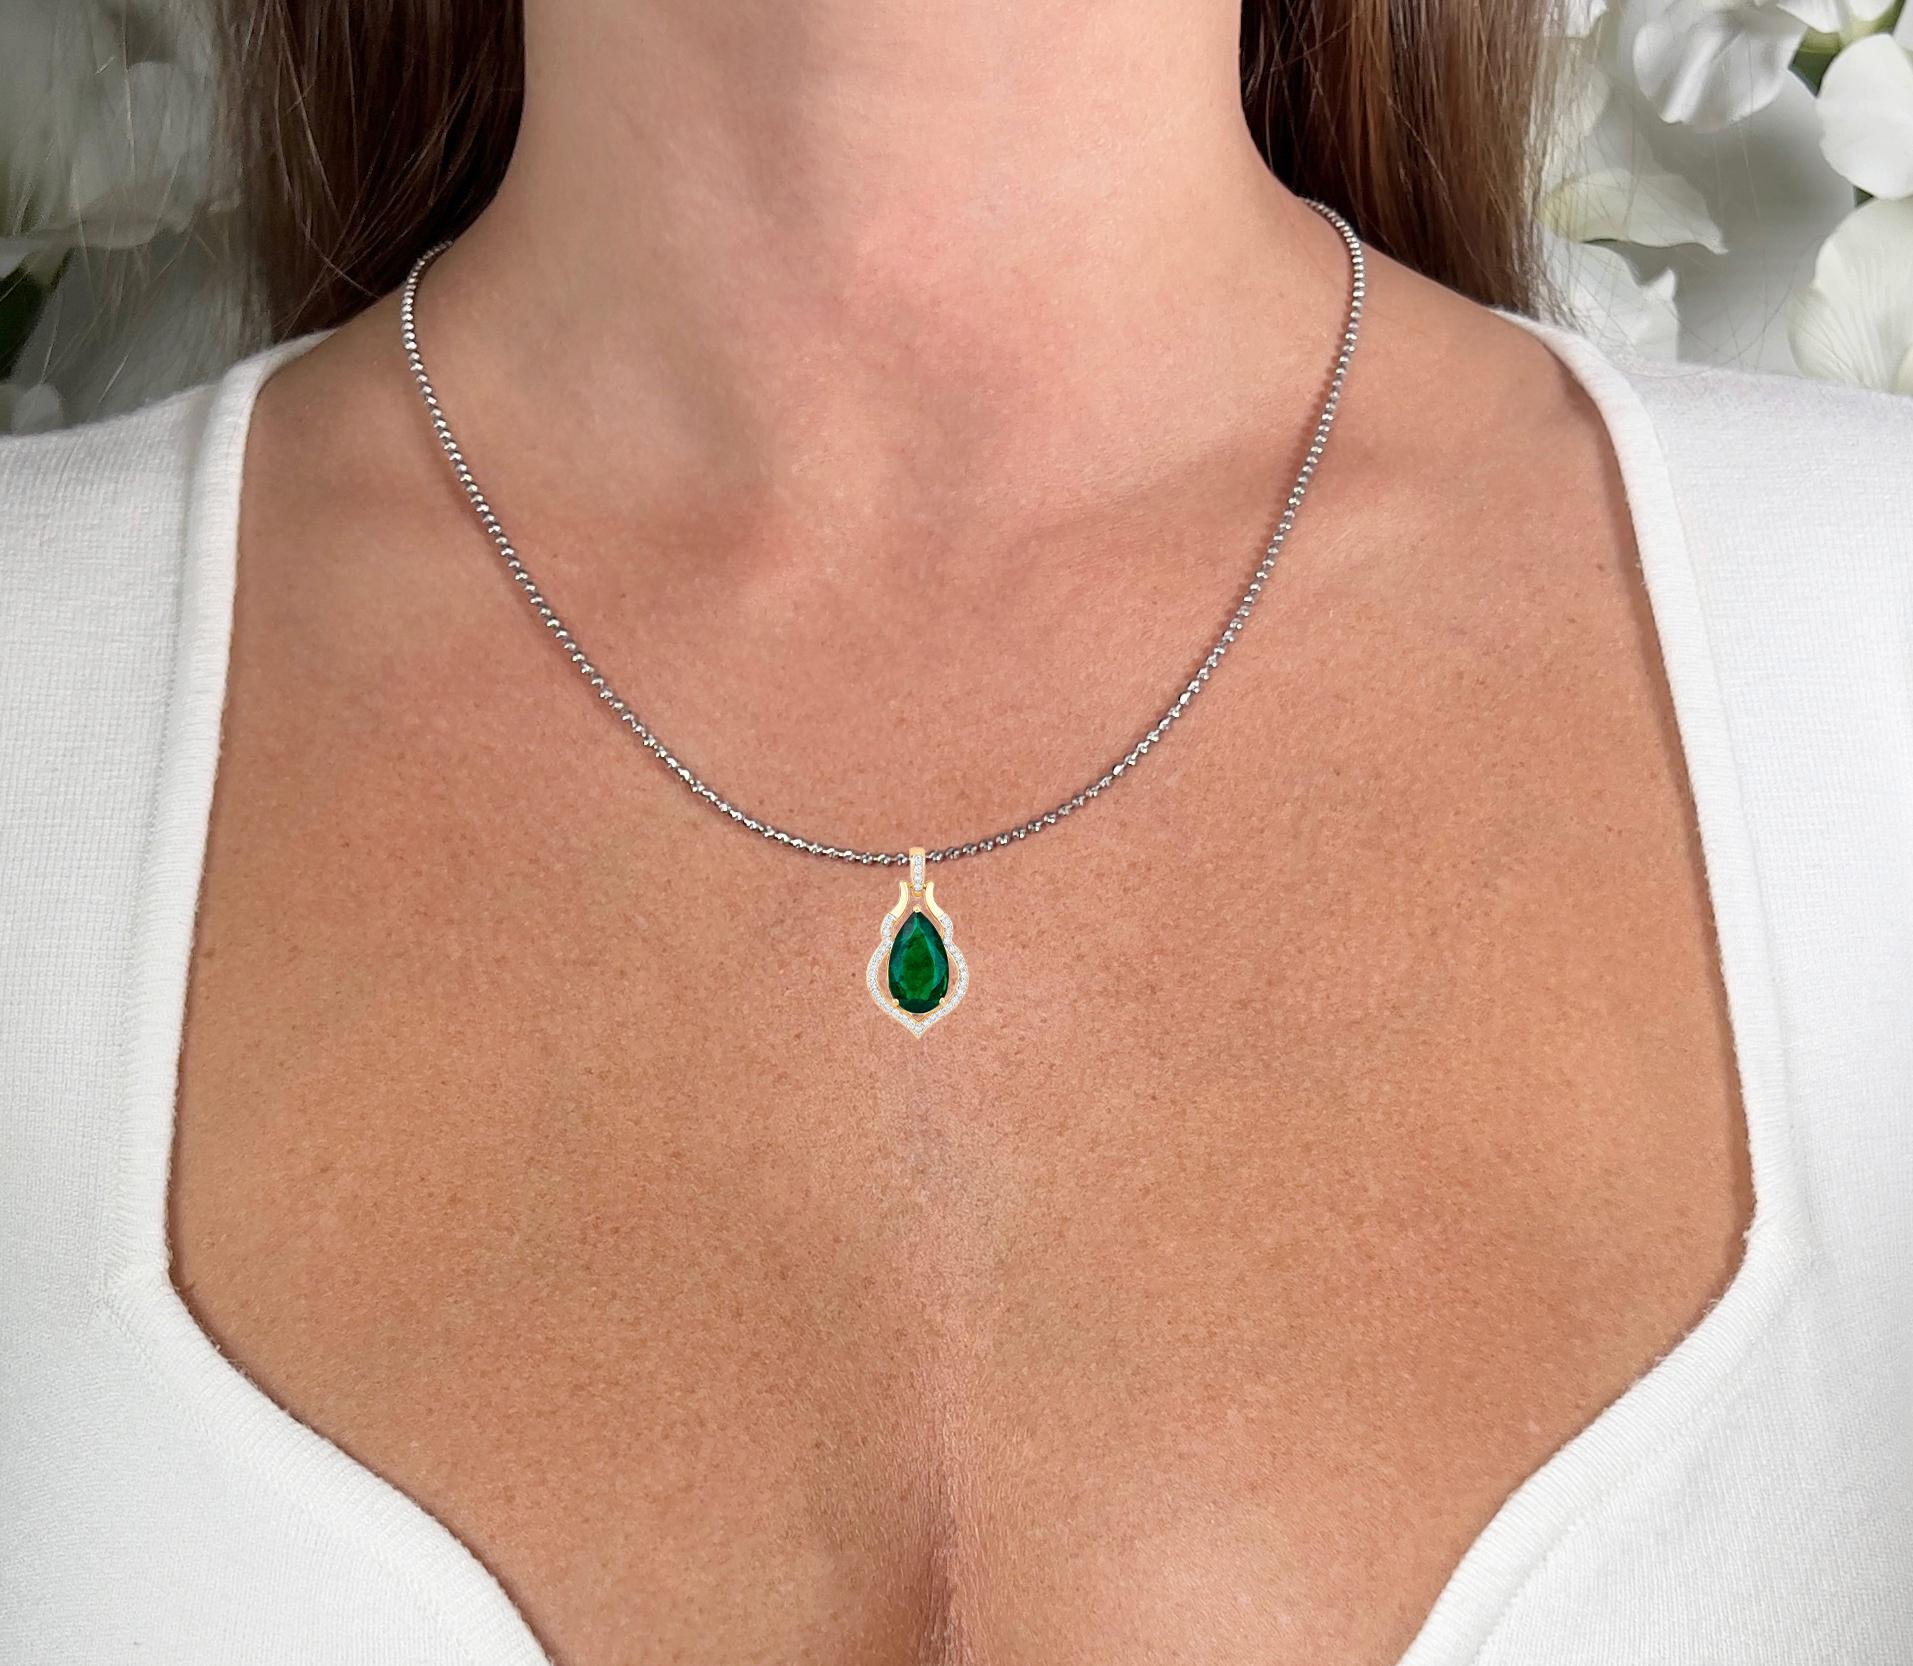 It comes with the IGI Certificate
All Gemstones are Natural
Pear Zambian Emerald = 3.34 Carat
33 Round Diamonds = 0.26 Carats
Metal: 14K Yellow Gold
Pendant Dimensions: 26 x 14 mm
